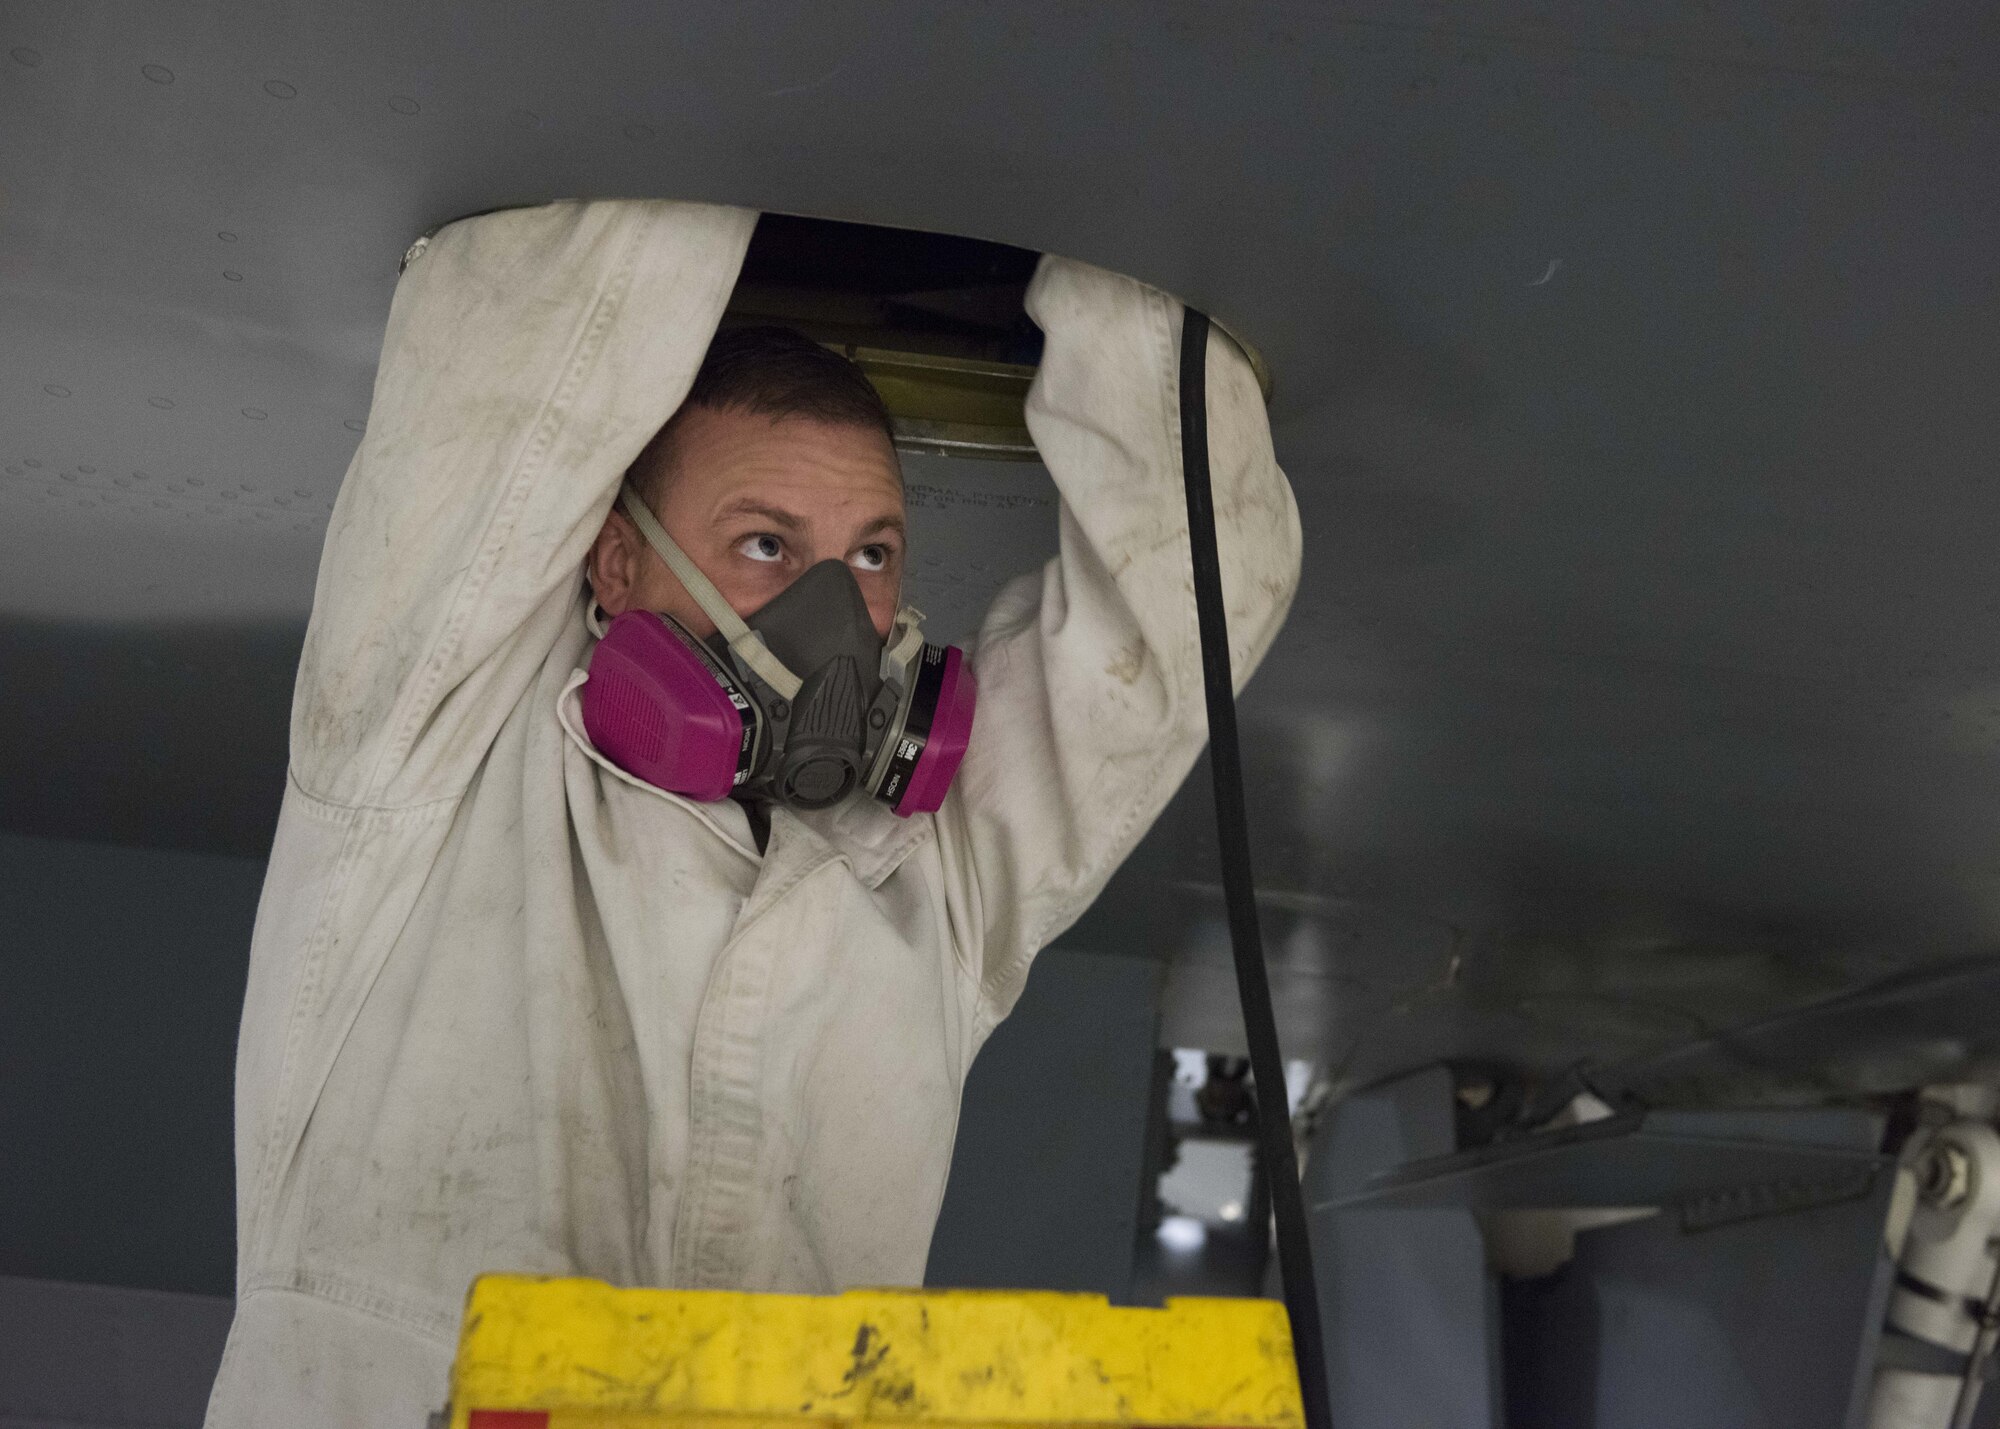 Master Sgt. Zach Kuno, 141st Maintenance Squadron, Aircraft Fuel Systems supervisor, enters a fuel tank on a KC-135 Stratotanker while wearing a respirator and anti-static suit at Fairchild Air Force Base, Washington, Nov. 21, 2017. The atmosphere in and around a fuel tank must be kept at safe levels of no more than 10 percent fuel vapor and oxygen levels between 19.5 and 23.5 percent to minimize health and fire risks. (U.S. Air Force photo/Senior Airman Ryan Lackey)